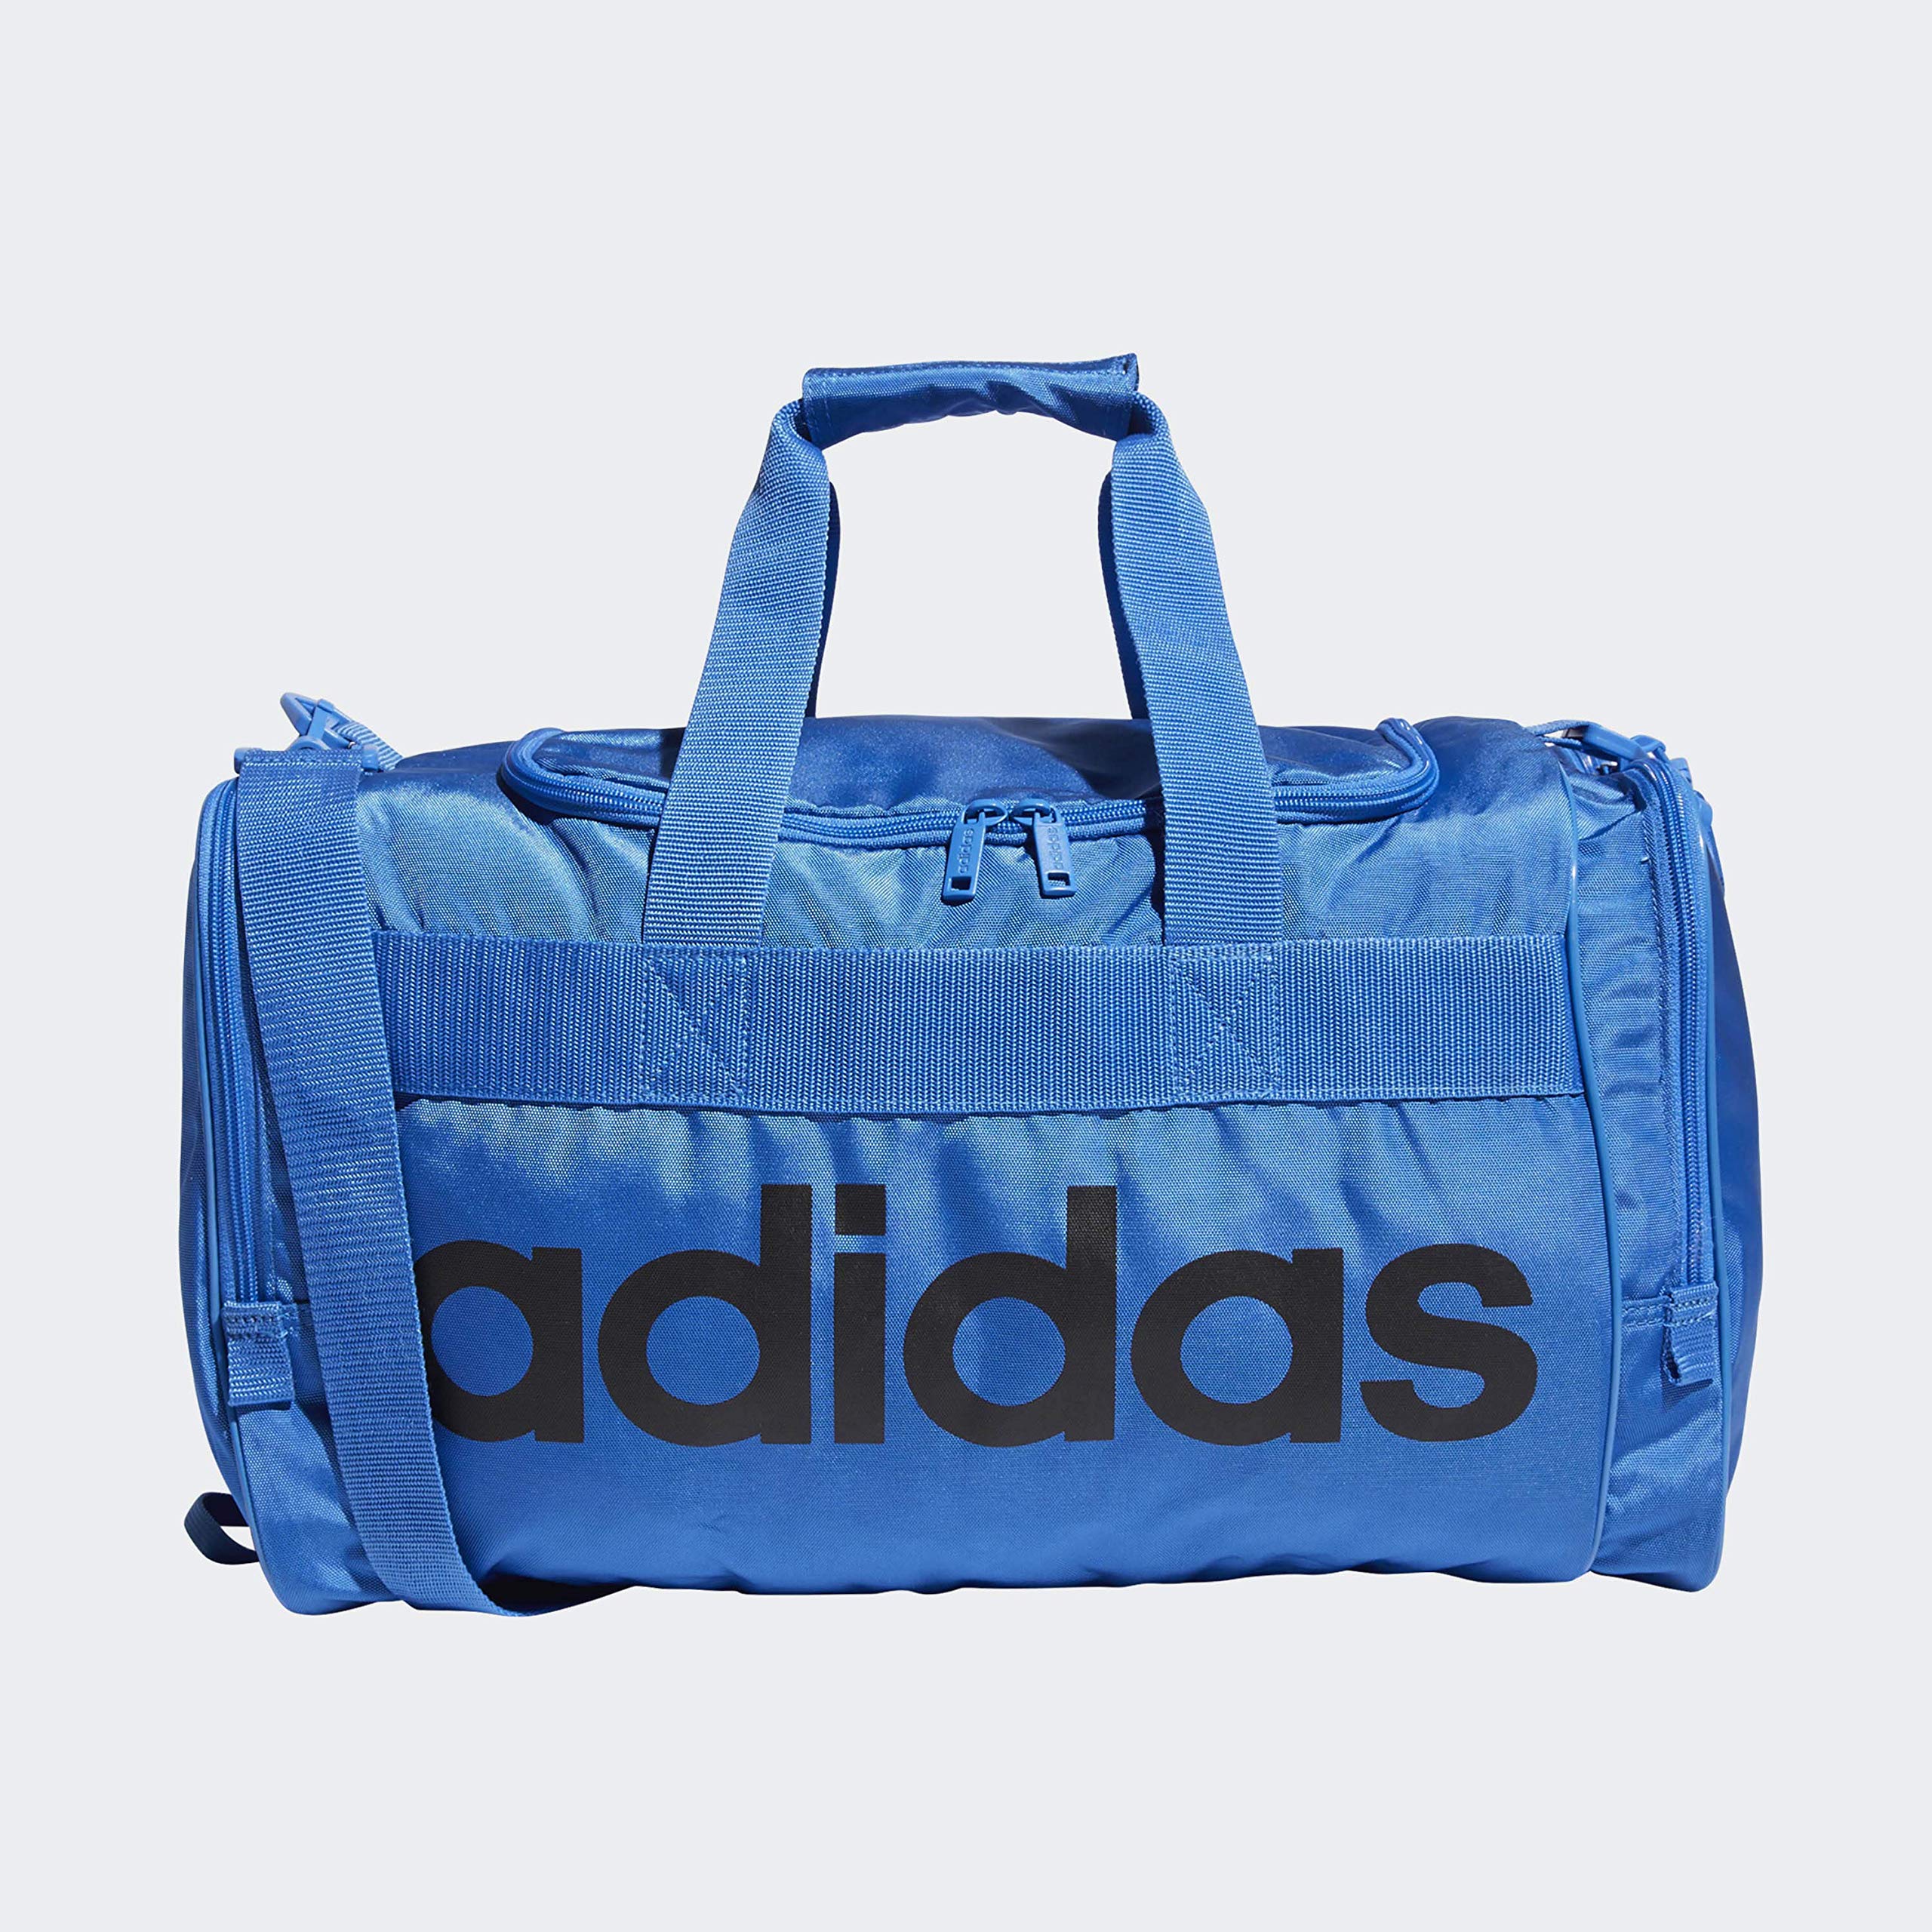 awesome gym bags